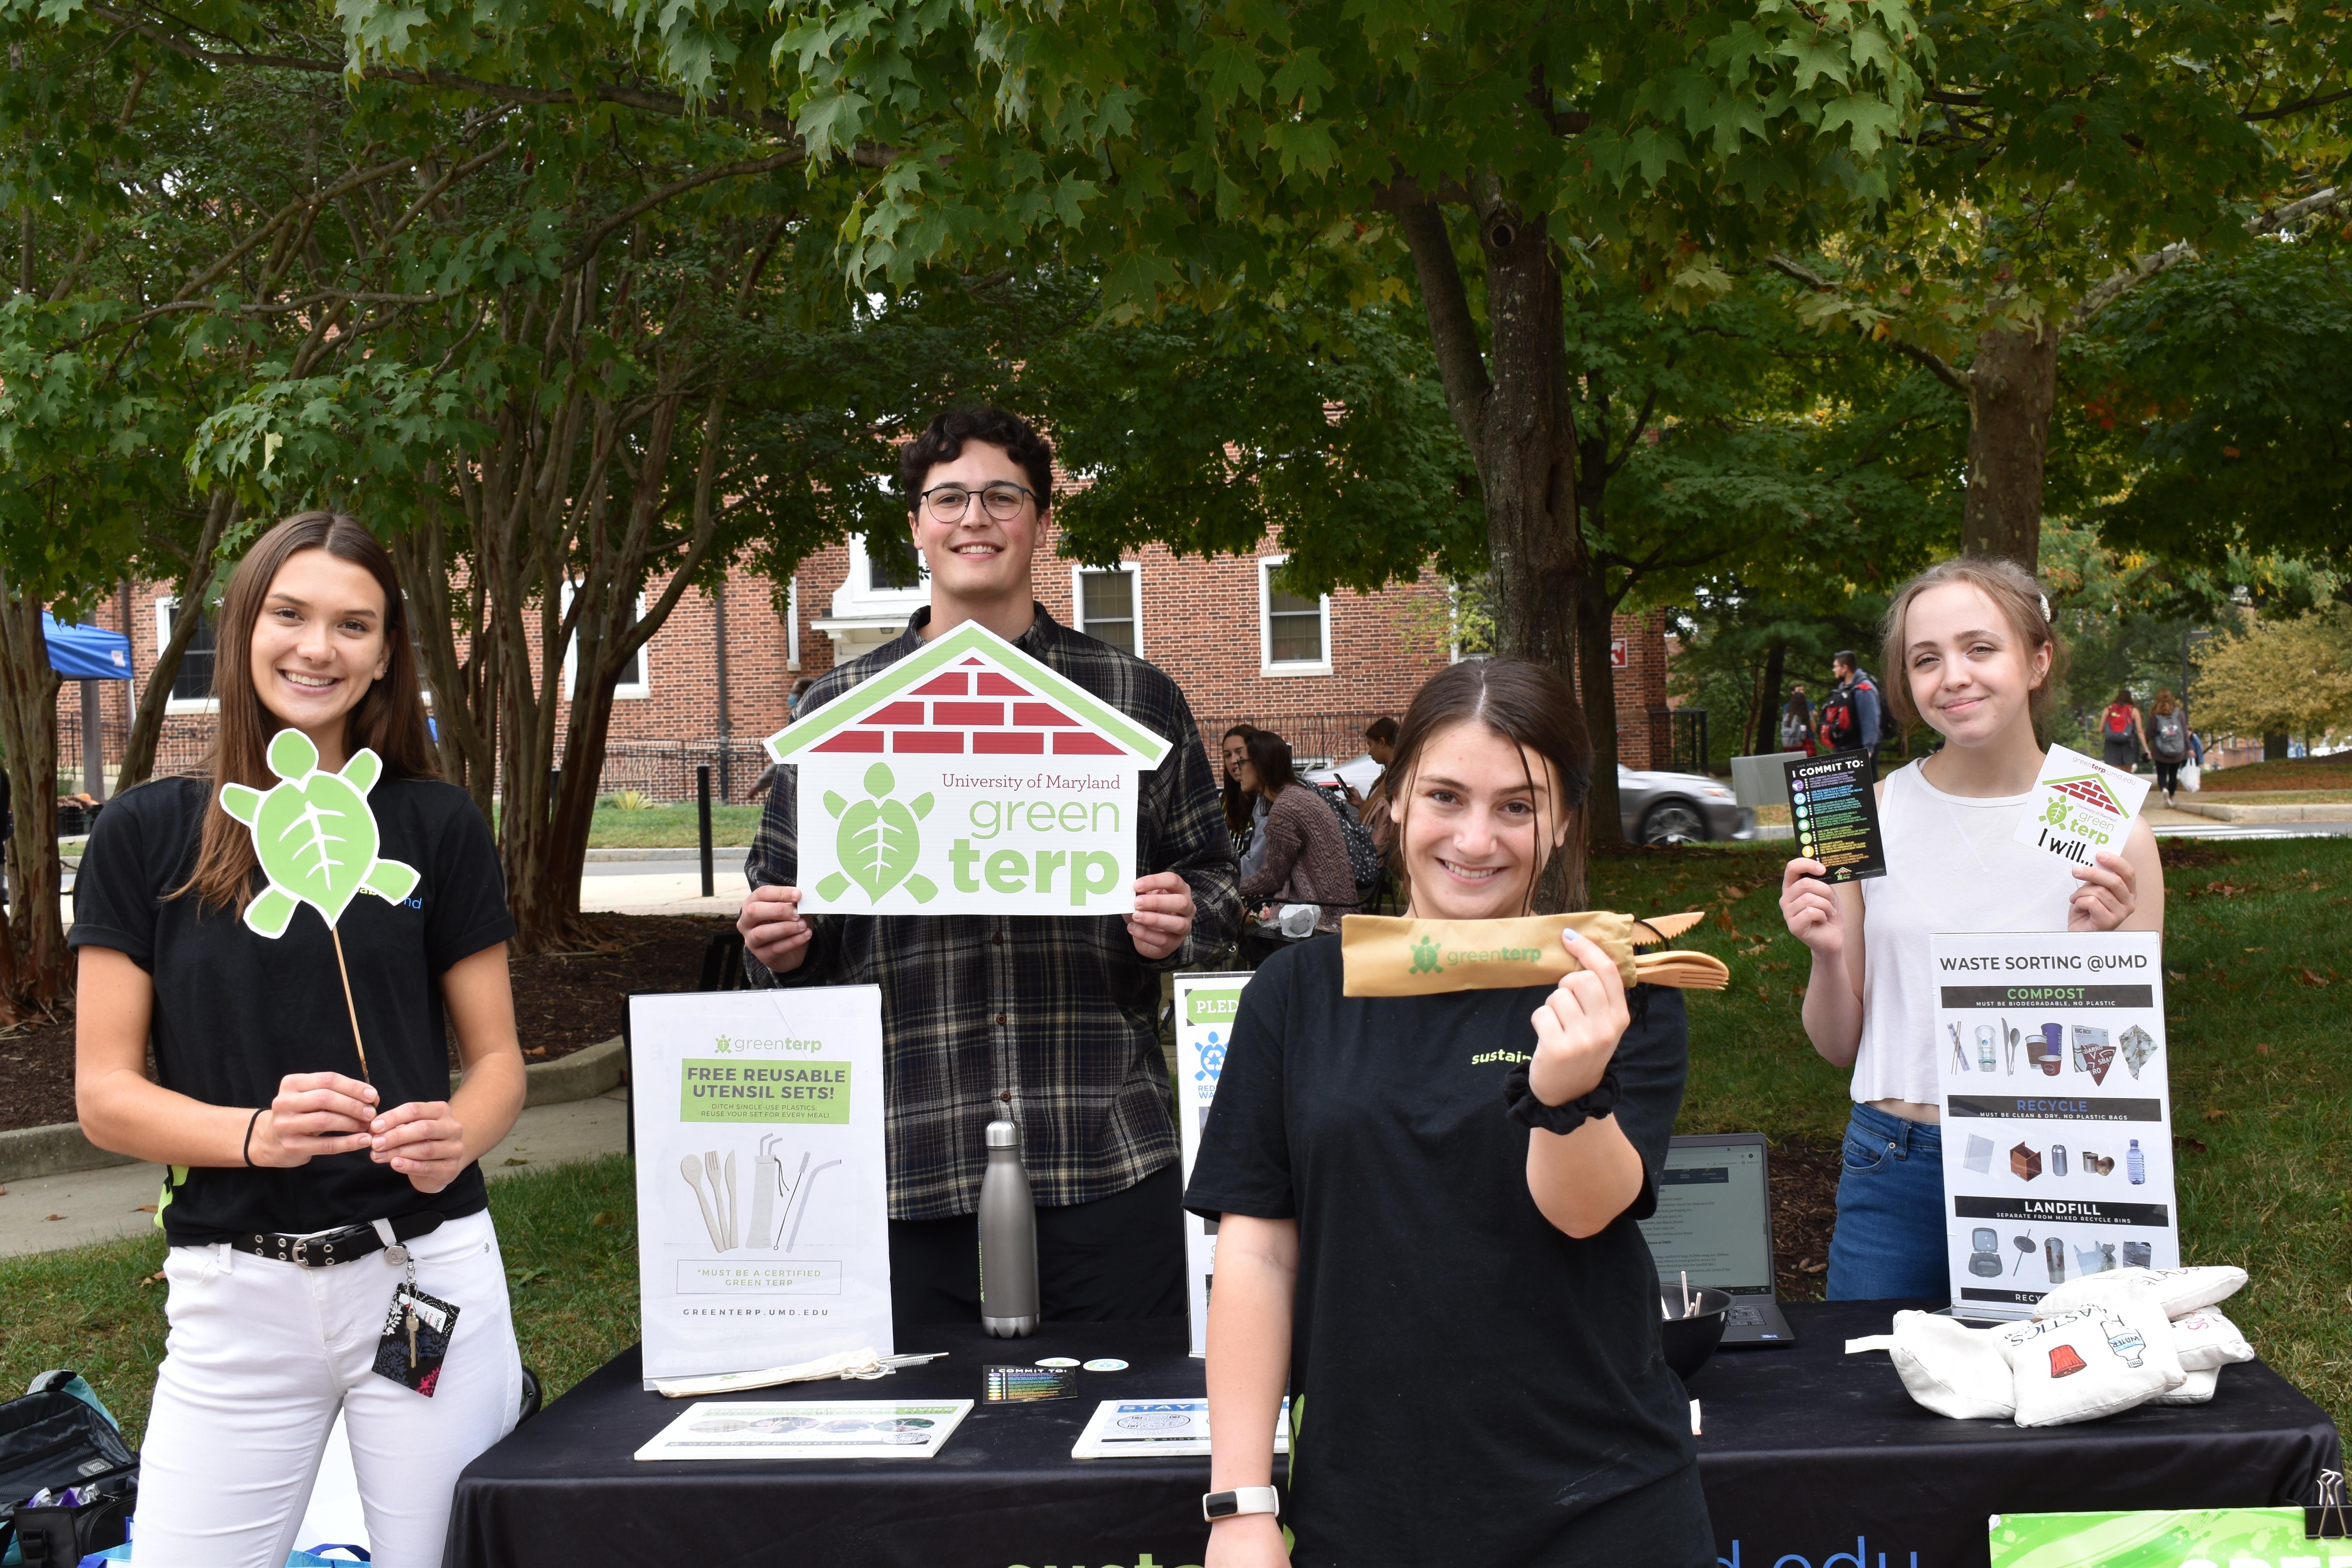 Outreach Team Tabling at the Farmers Market wearing SustainableUMD shirts